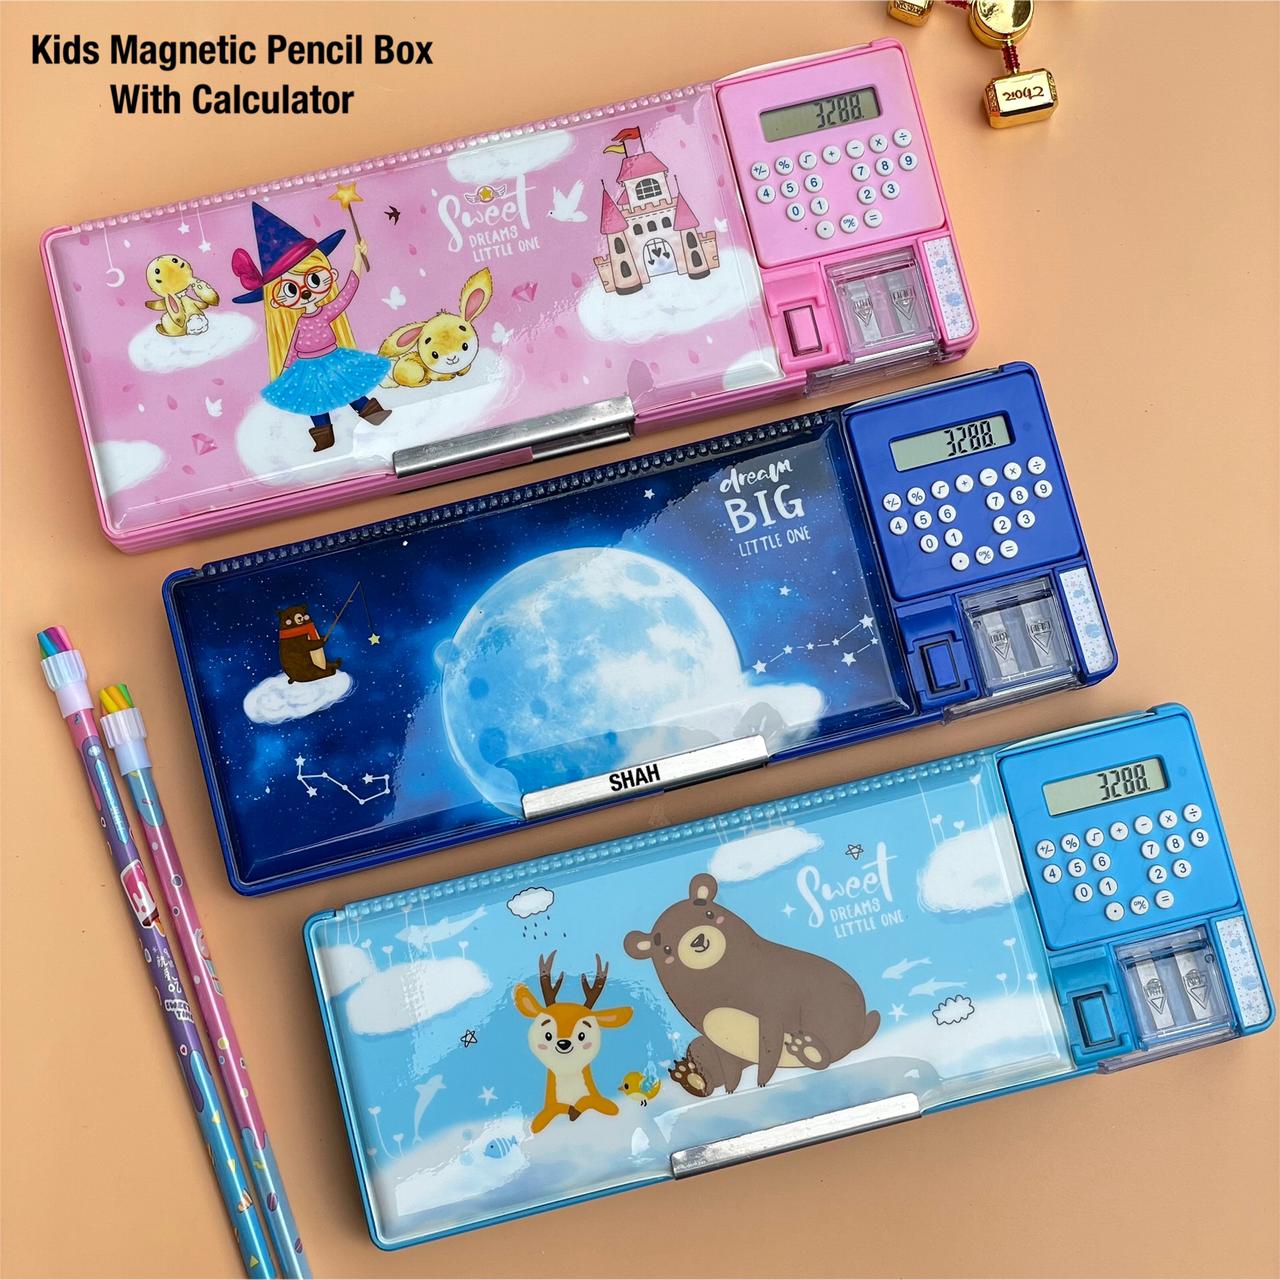 KIDS MAGNETIC PENCIL BOX WITH CALCULATOR-PANIPBWC001 –